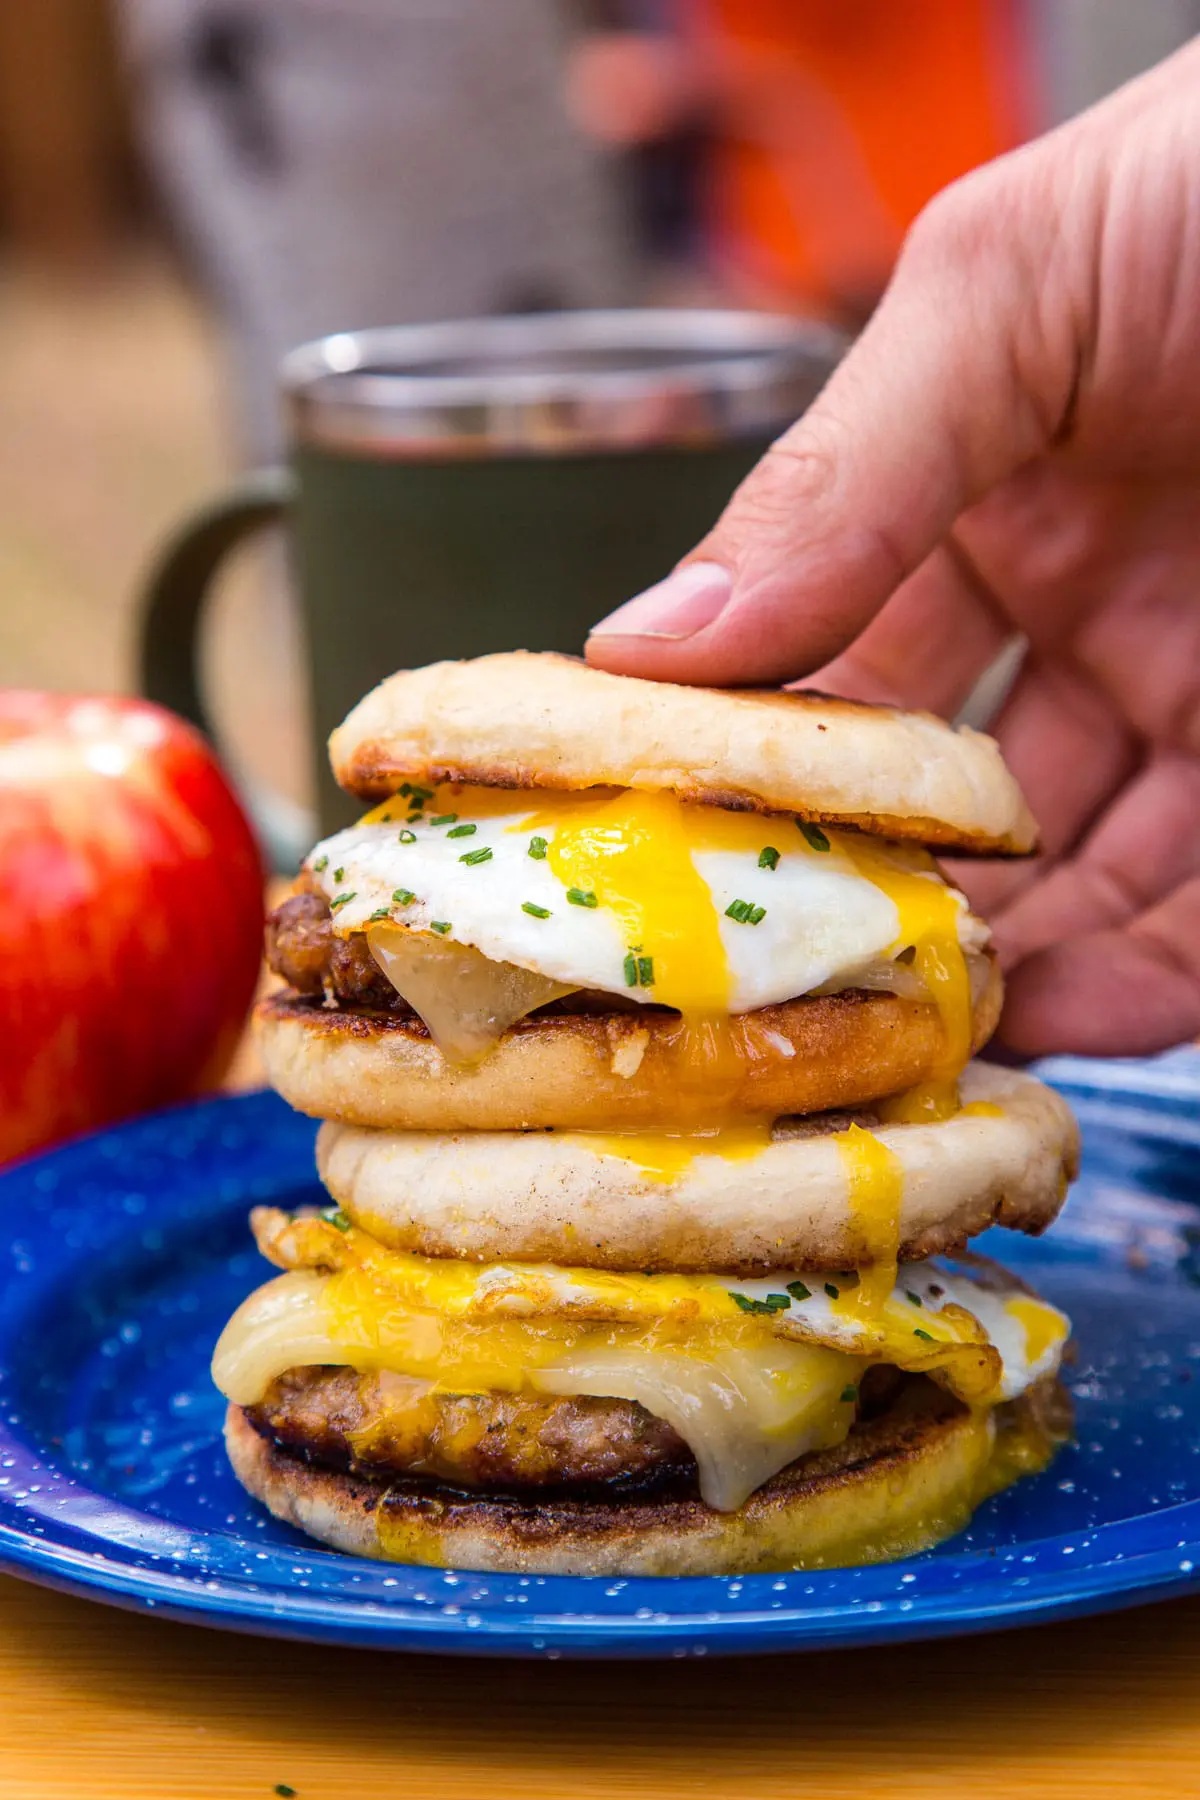 Two stacked breakfast sandwiches on a blue plate. A hand is picking one up.